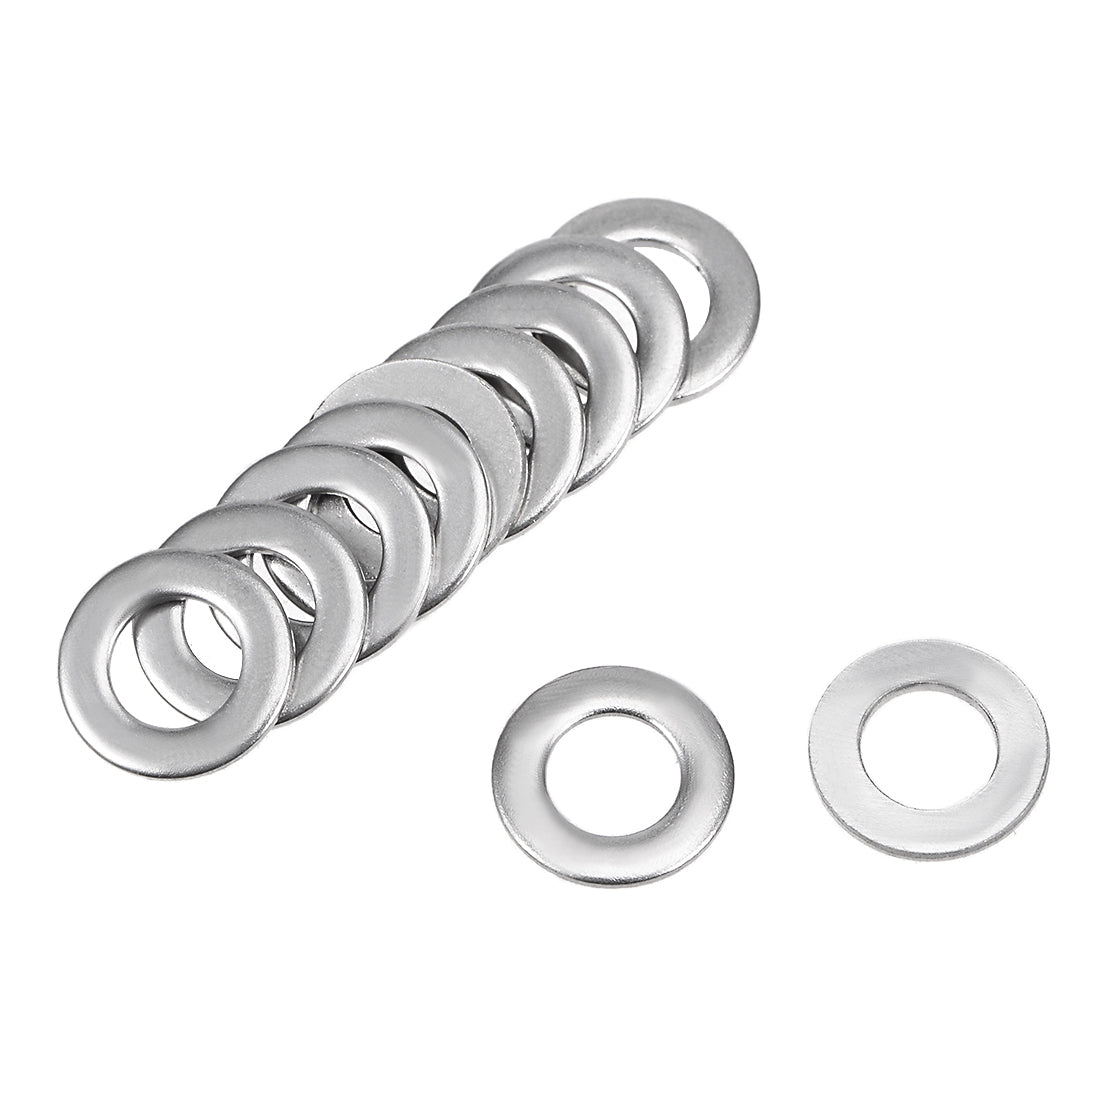 uxcell Uxcell 200Pcs 4mm x 8mm x 0.8mm 304 Stainless Steel Flat Washer for Screw Bolt